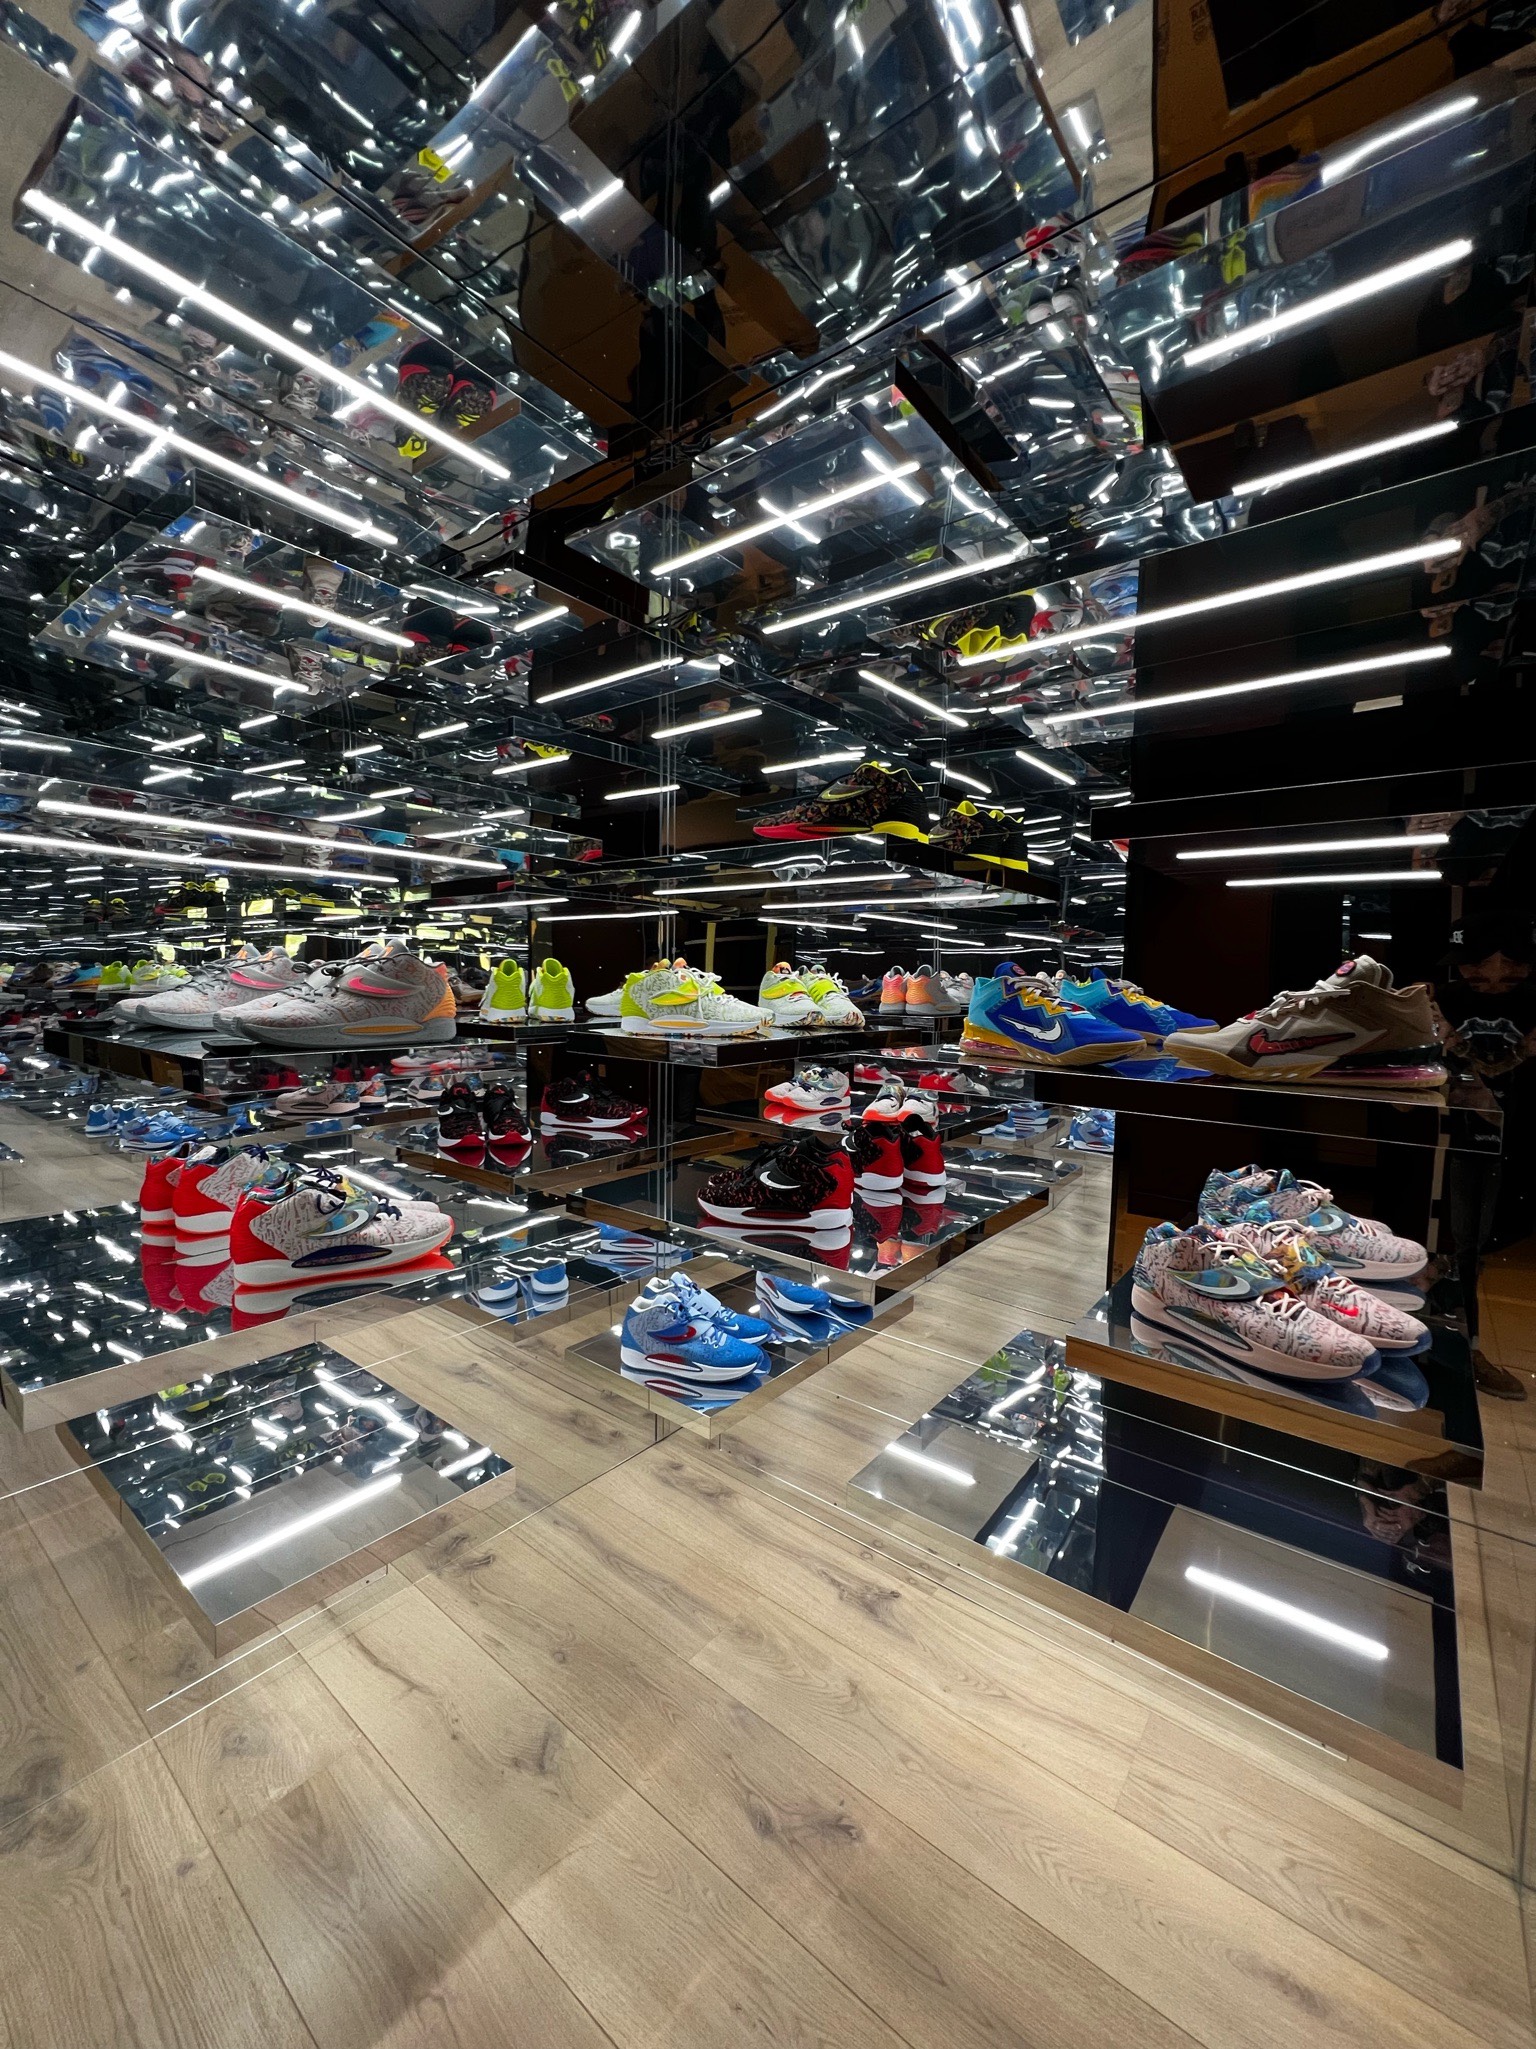 KEVIN DURANT Infinity Closet / Shoe Room